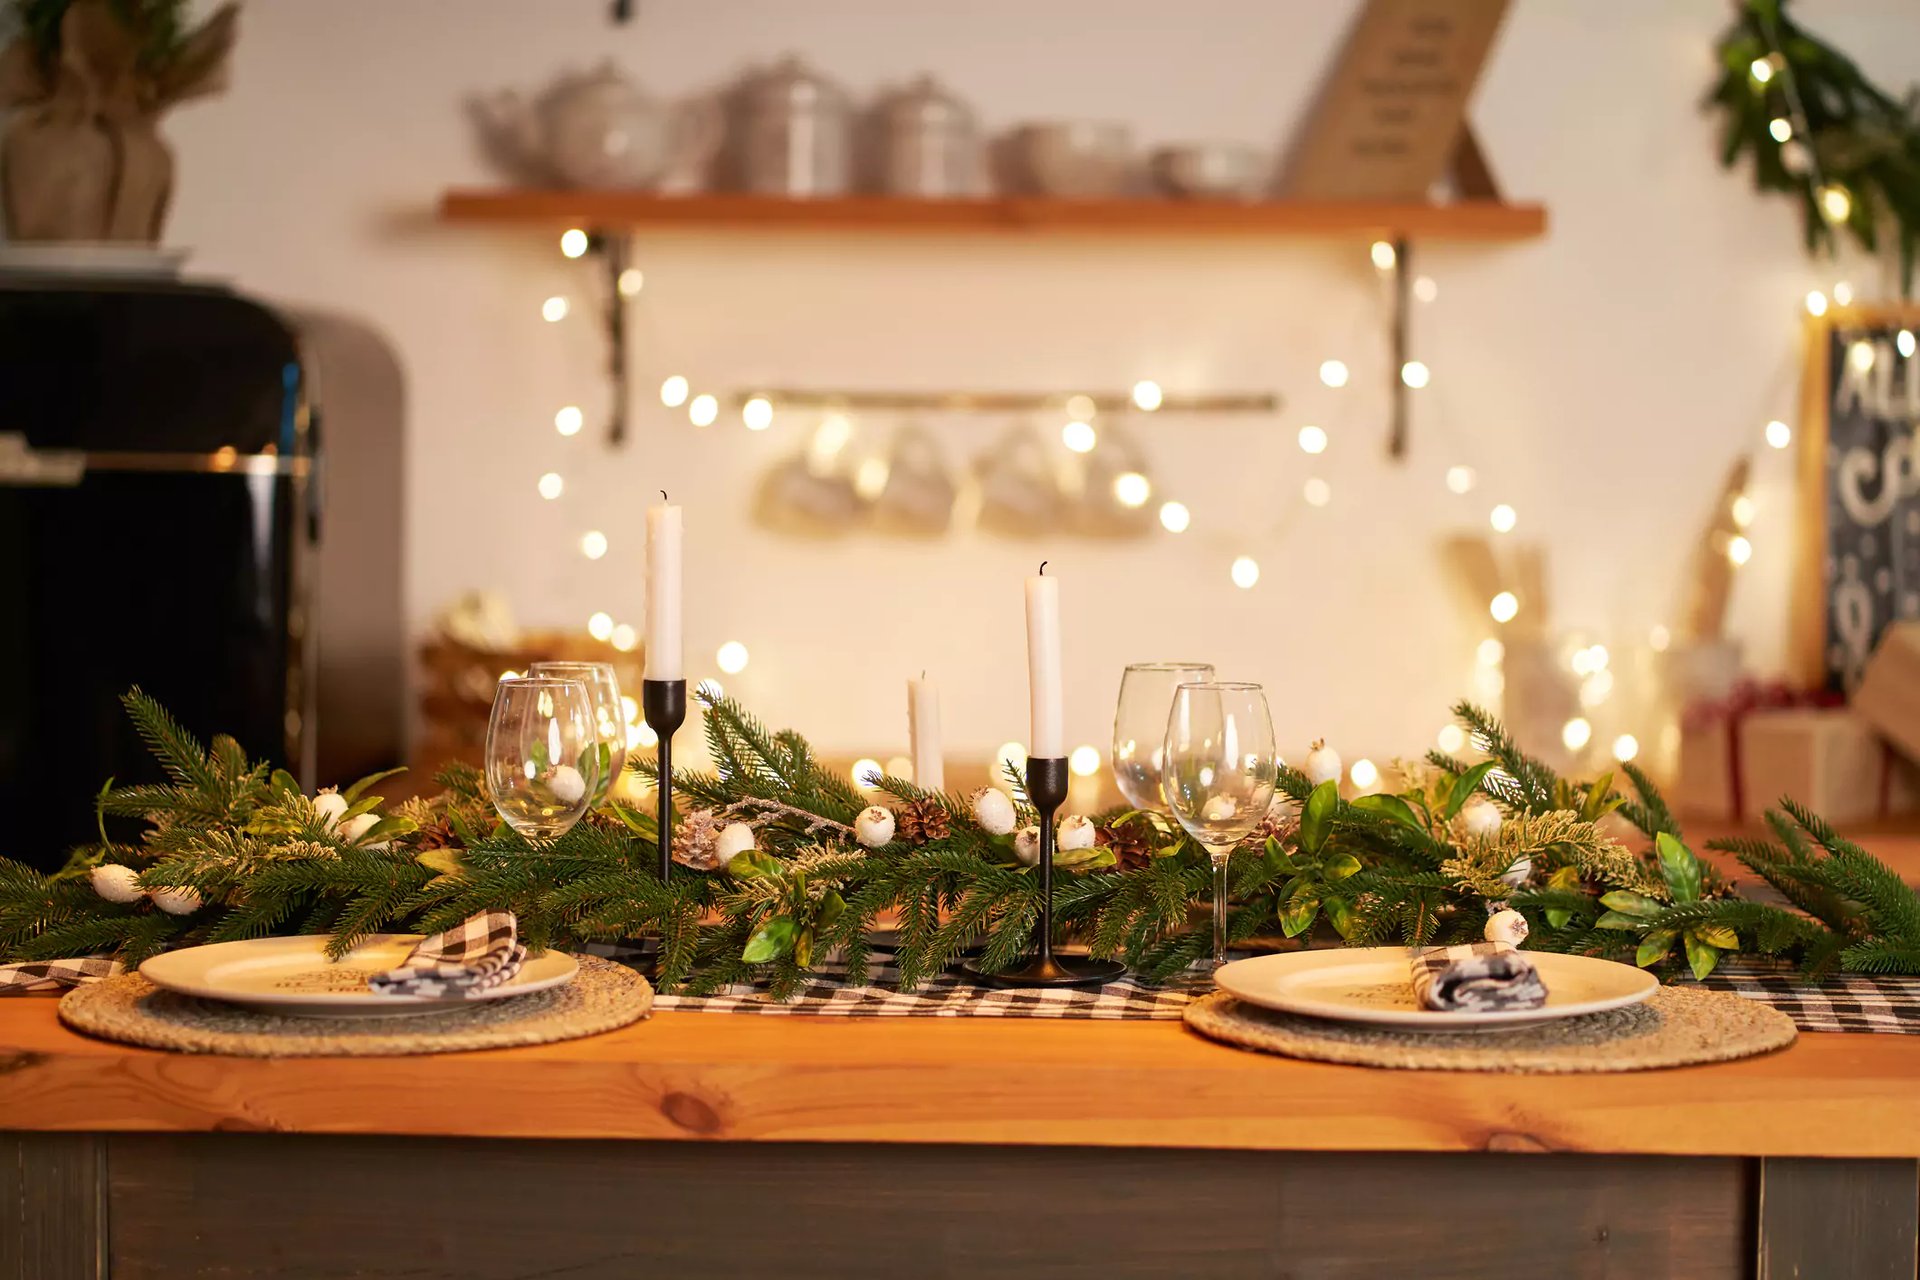 Christmas table scapes with fairylights and garland